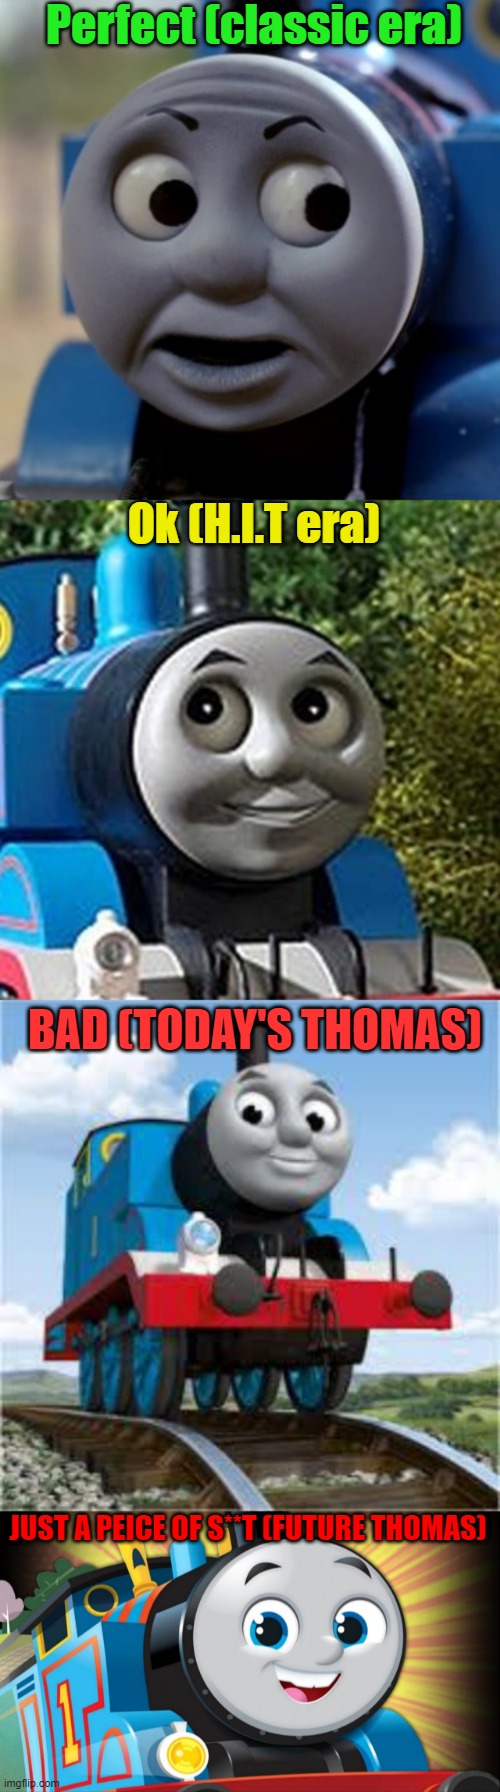 ranking all the Thomas the Tank Engine eras from good to bad. - Imgflip